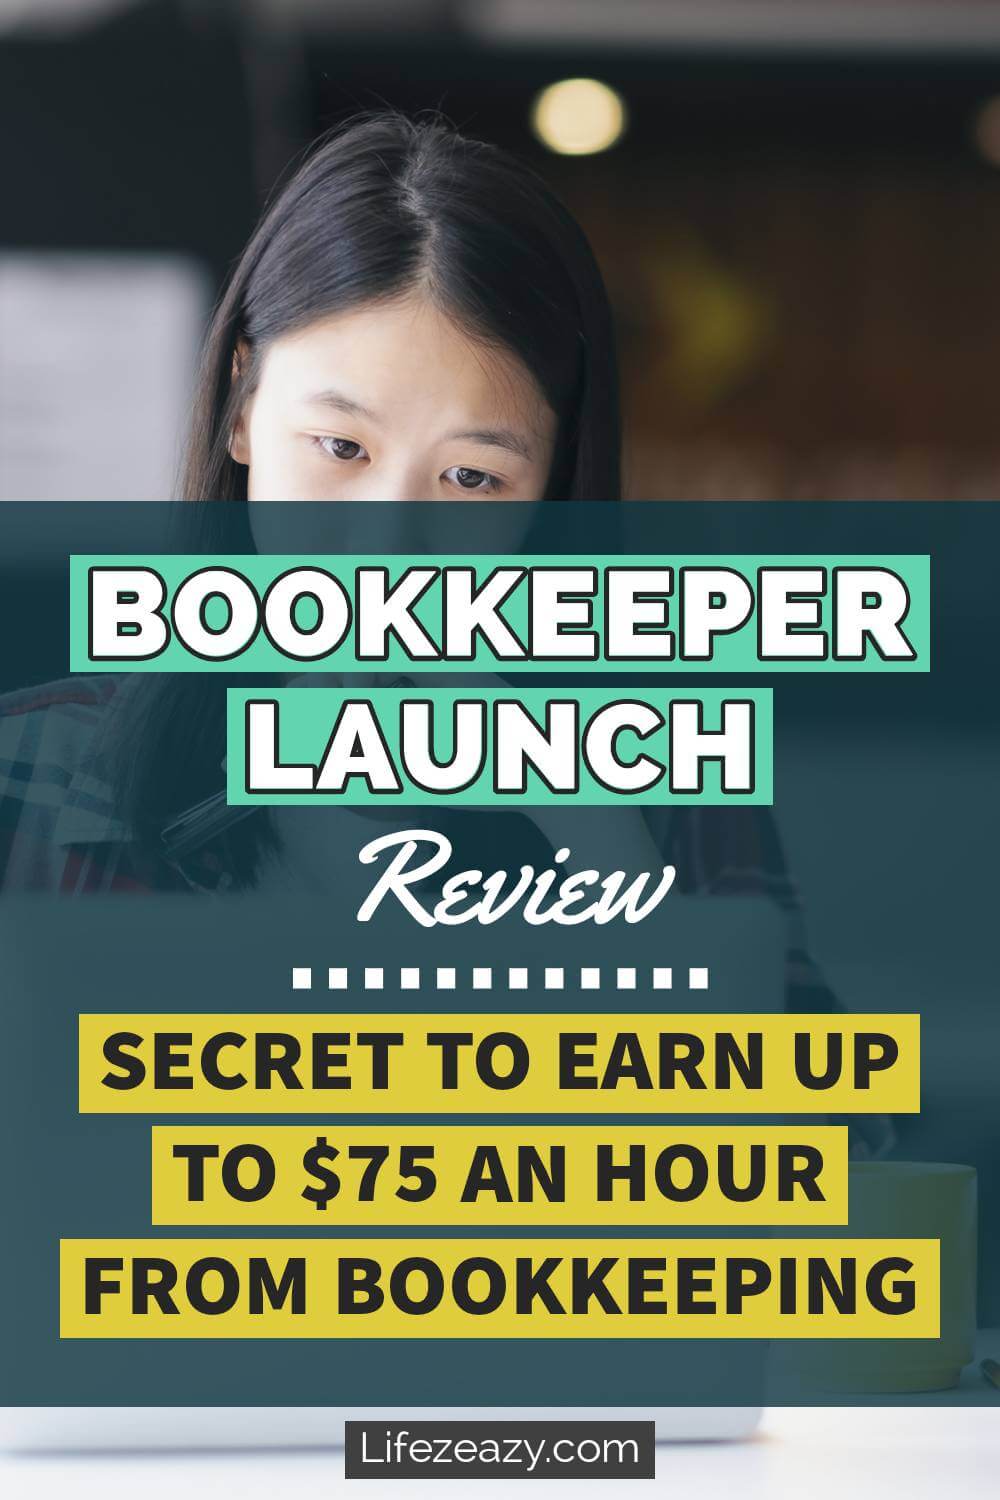 Bookkeeper Launch Review Pinterest pin